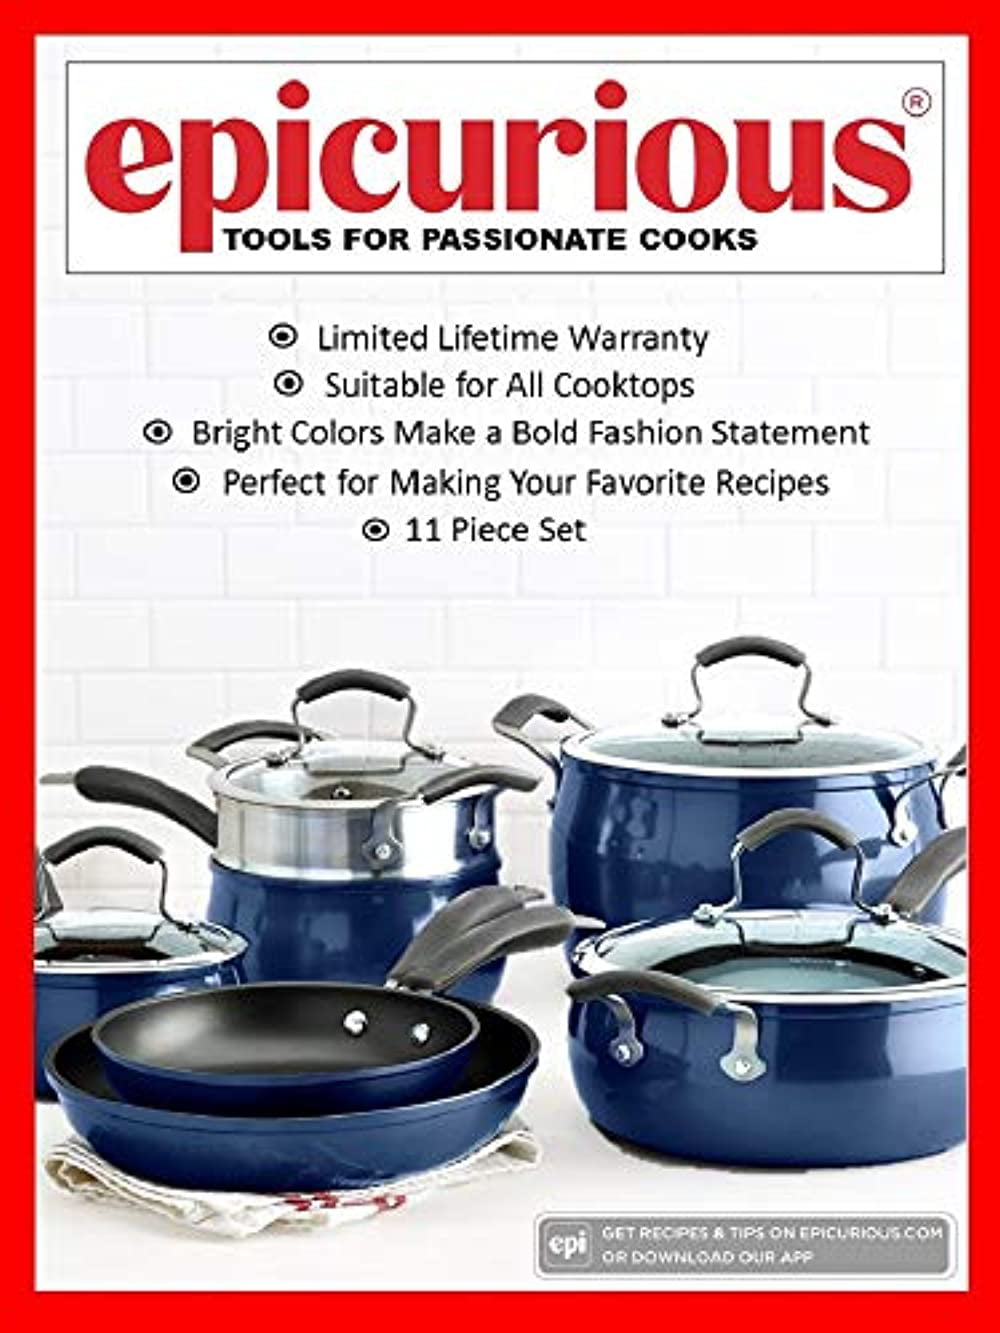 Our Favorite Epicurious Cookware Products